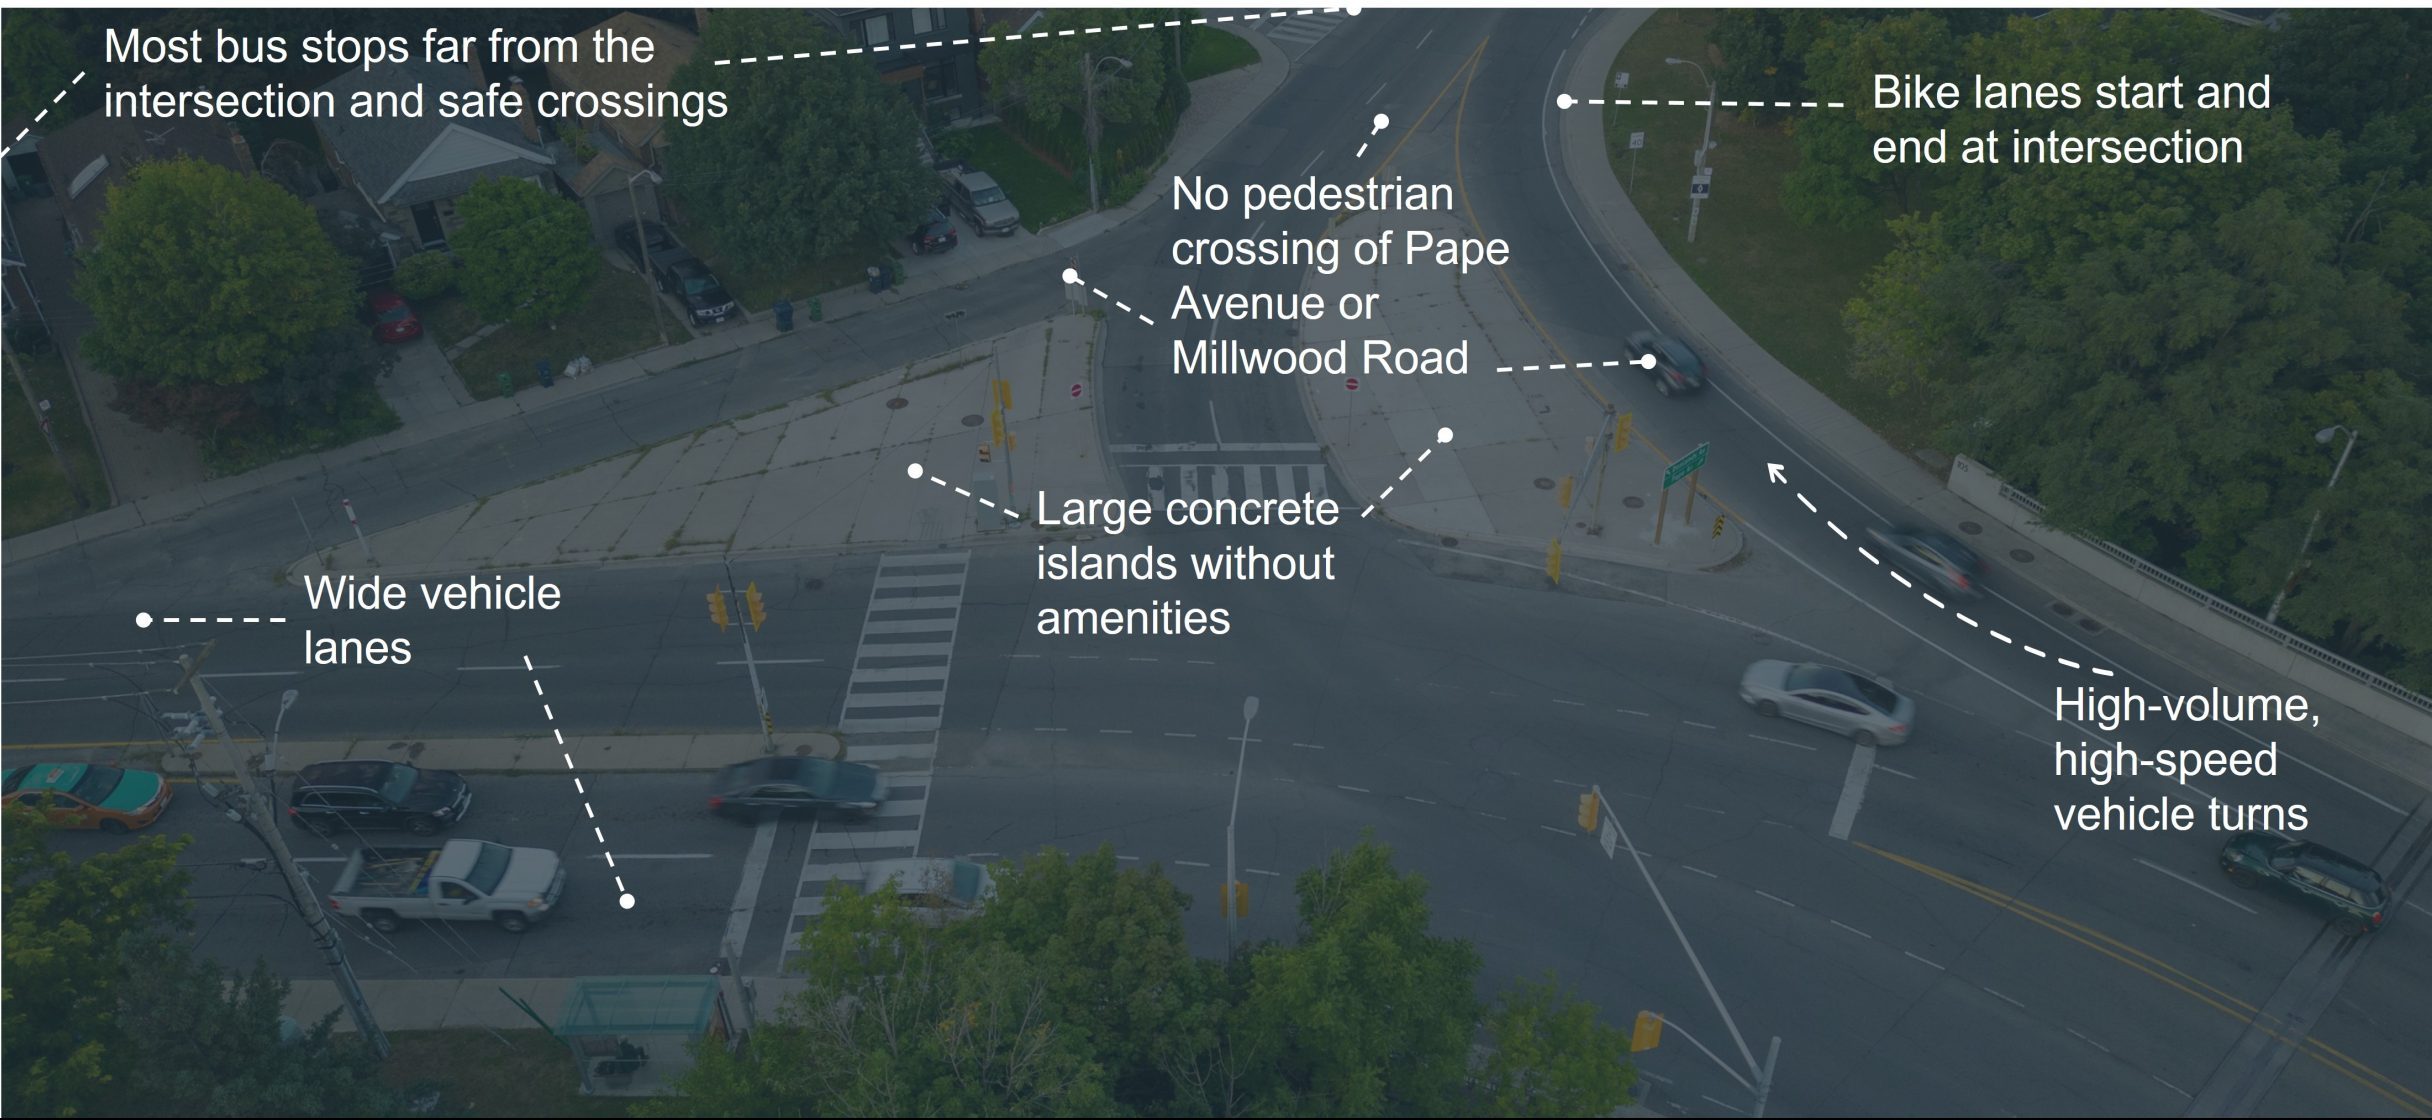 Labels pointing to current issues and challenges on the aerial view of the Overlea Boulevard intersection today, looking north.